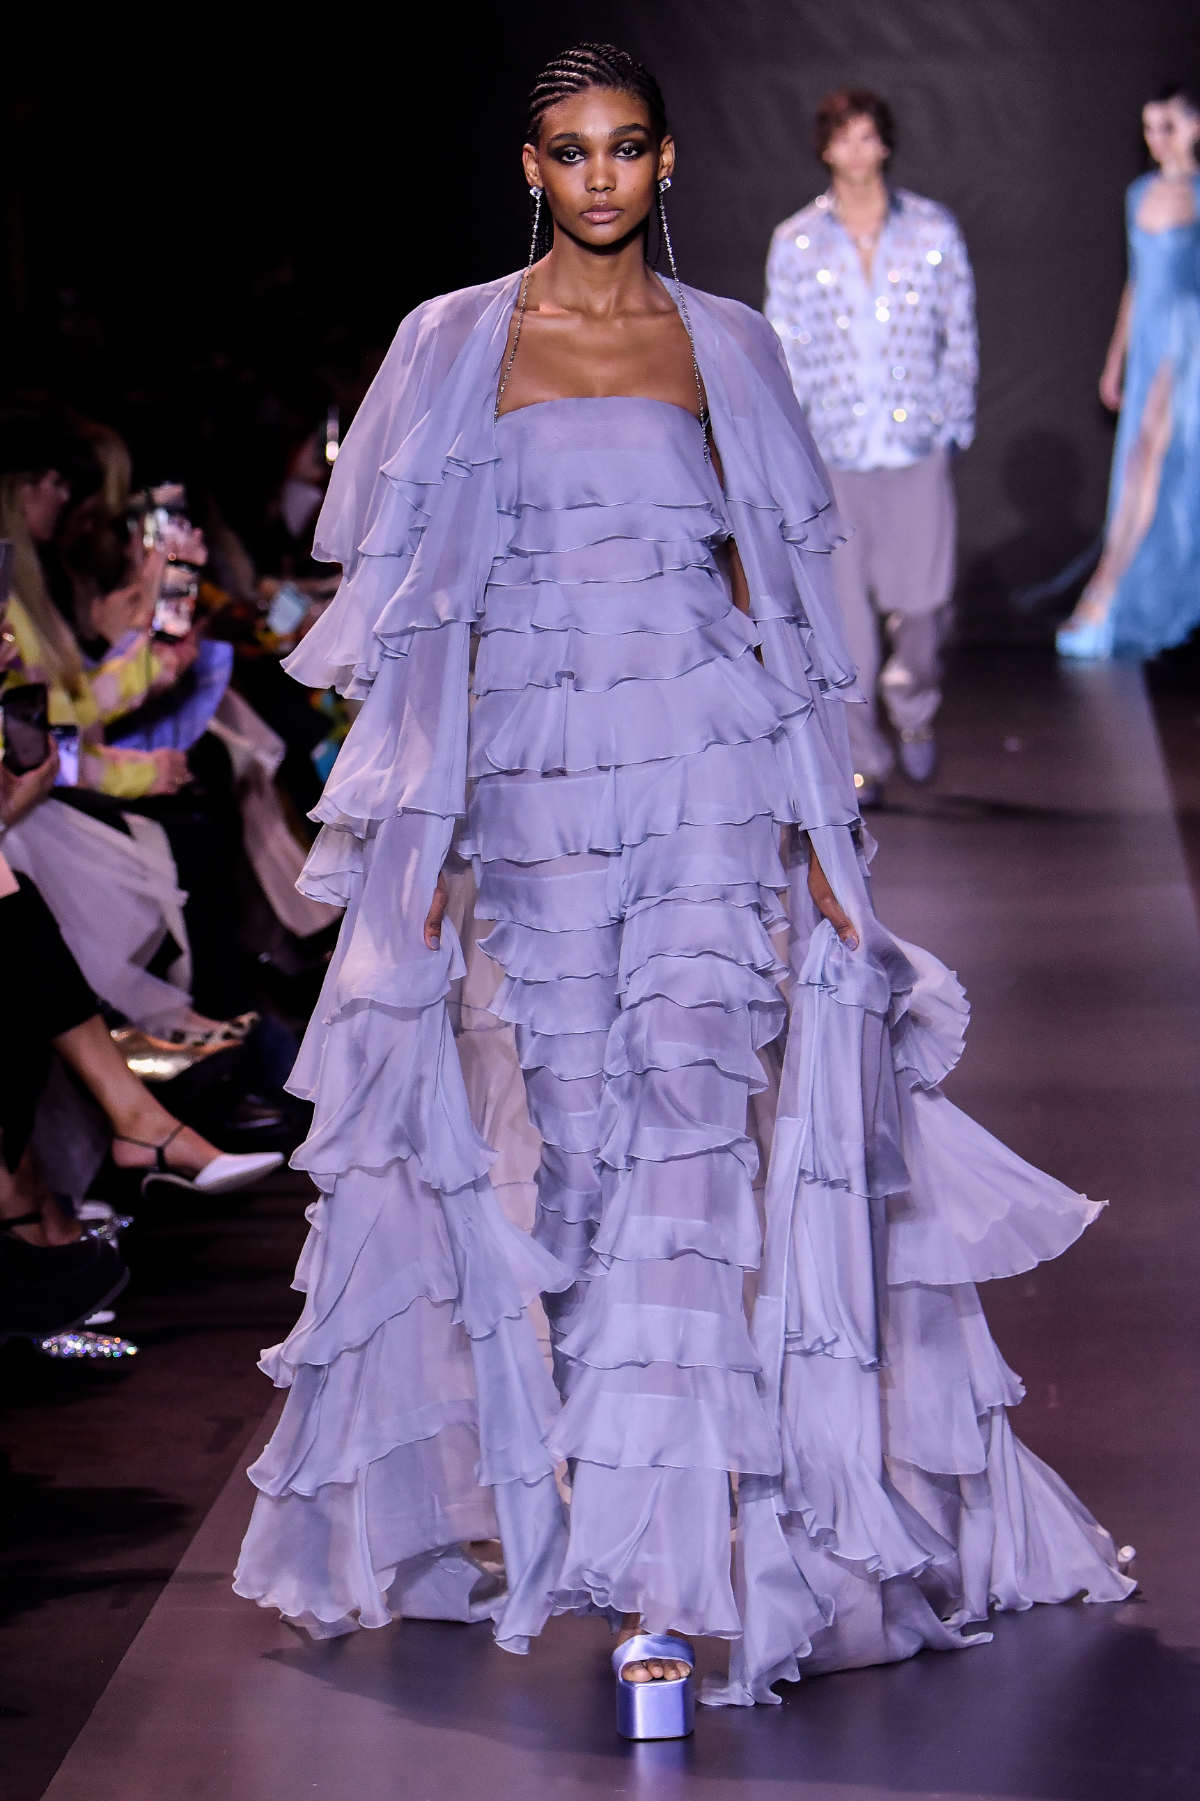 Maison Georges Hobeika Presents Its New Haute Couture Spring Summer 2023 Collection: Small Talks